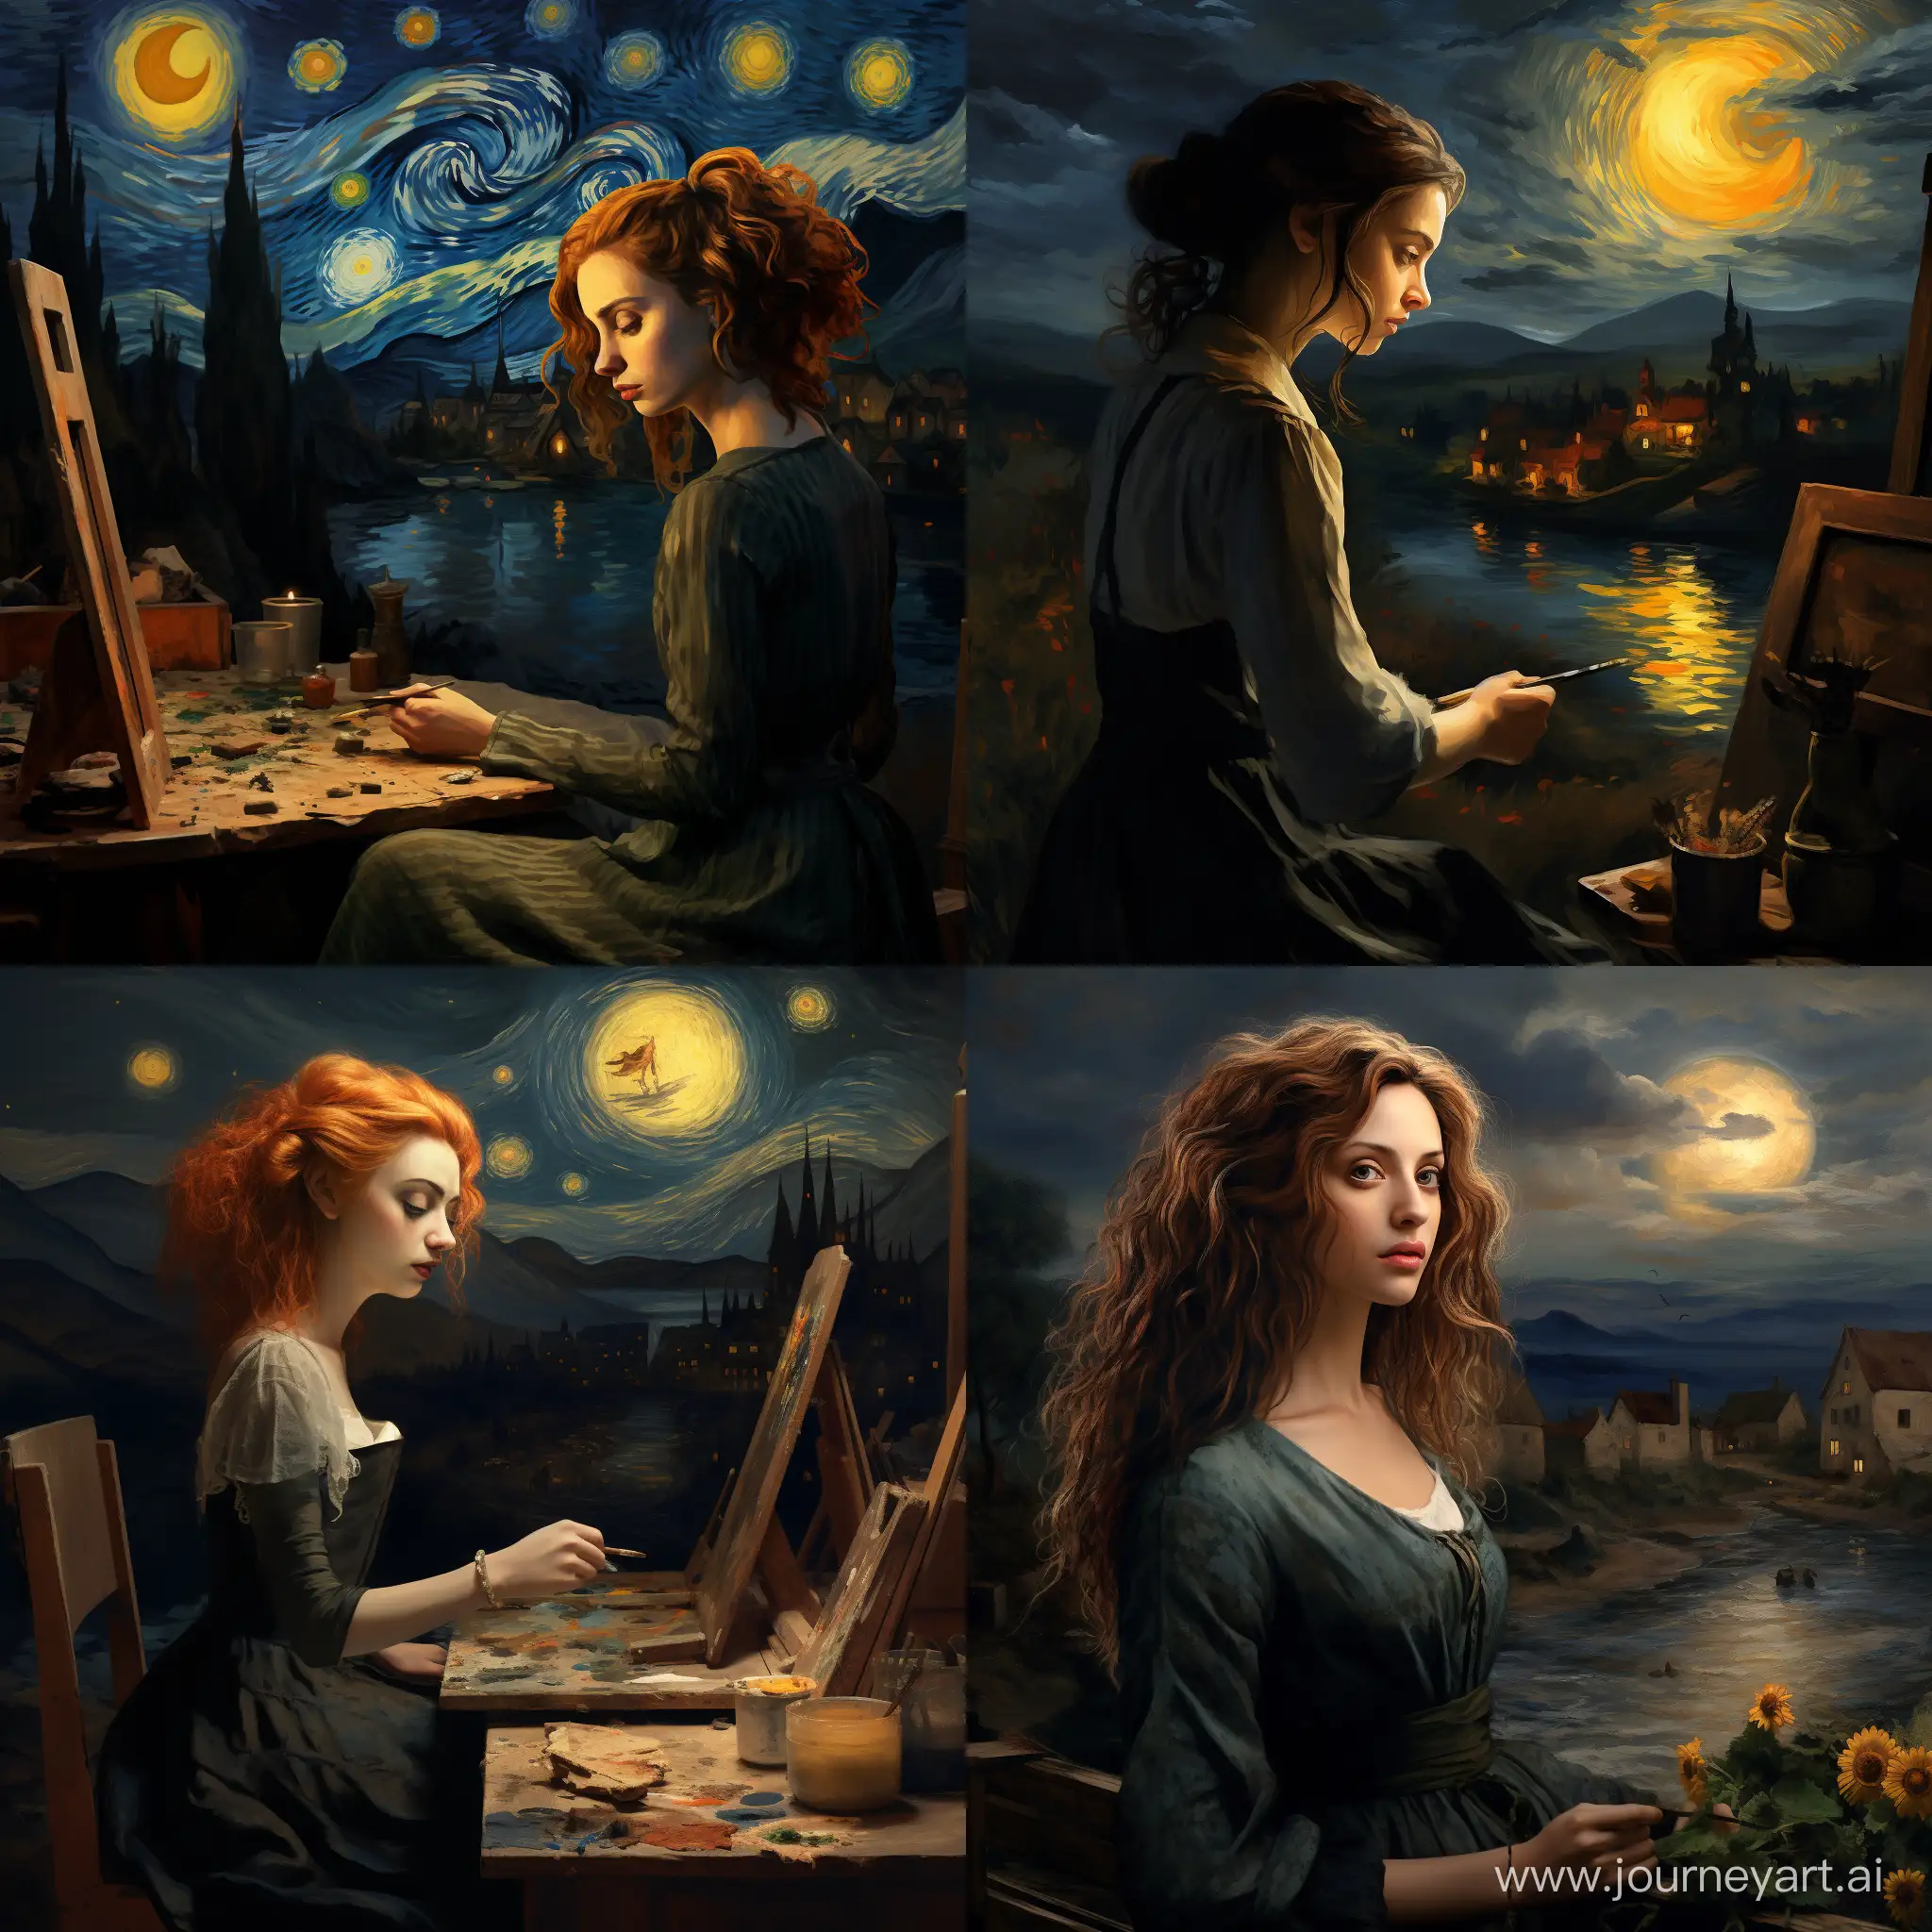 Digital painting of a woman mixing van Gogh and Tim Burton style in a 18th century scenery